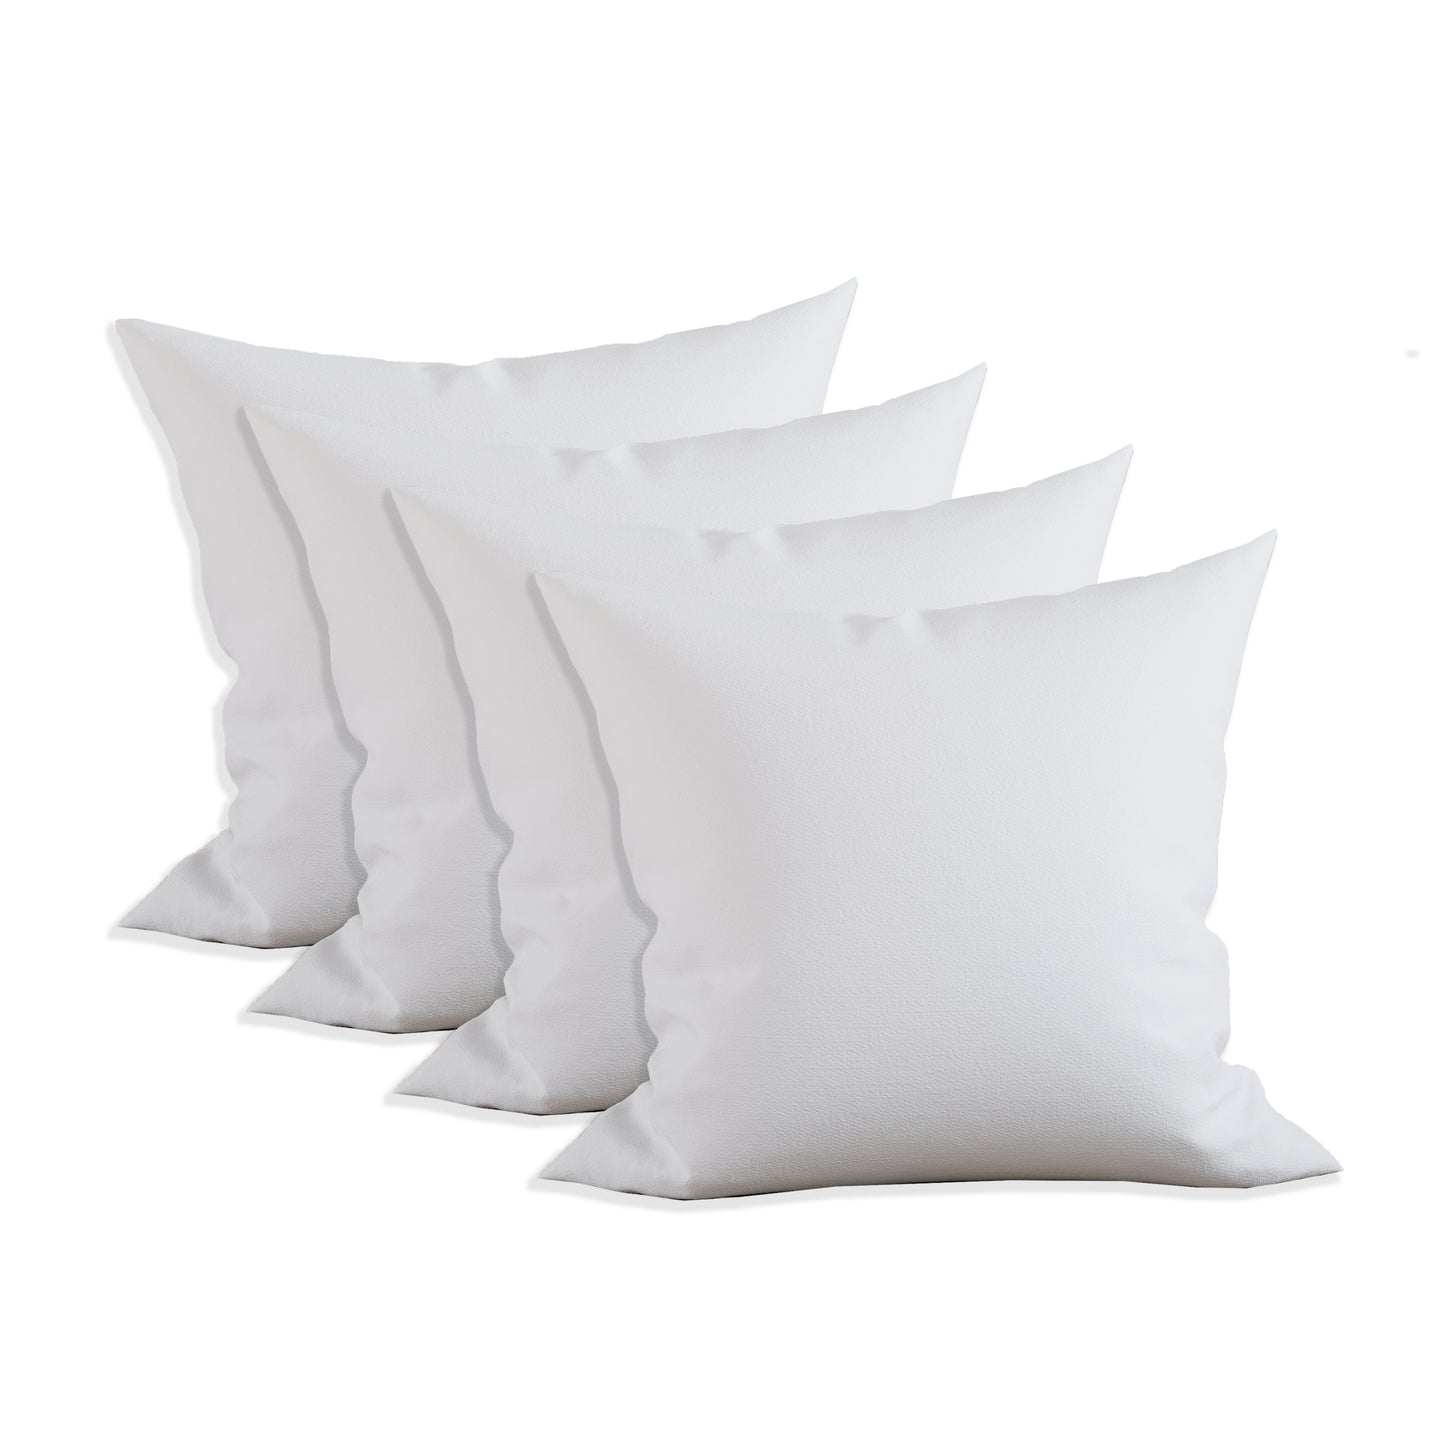 Elegant Comfort Pillow Inserts - Poly-Cotton Shell Siliconized Fiber Filling